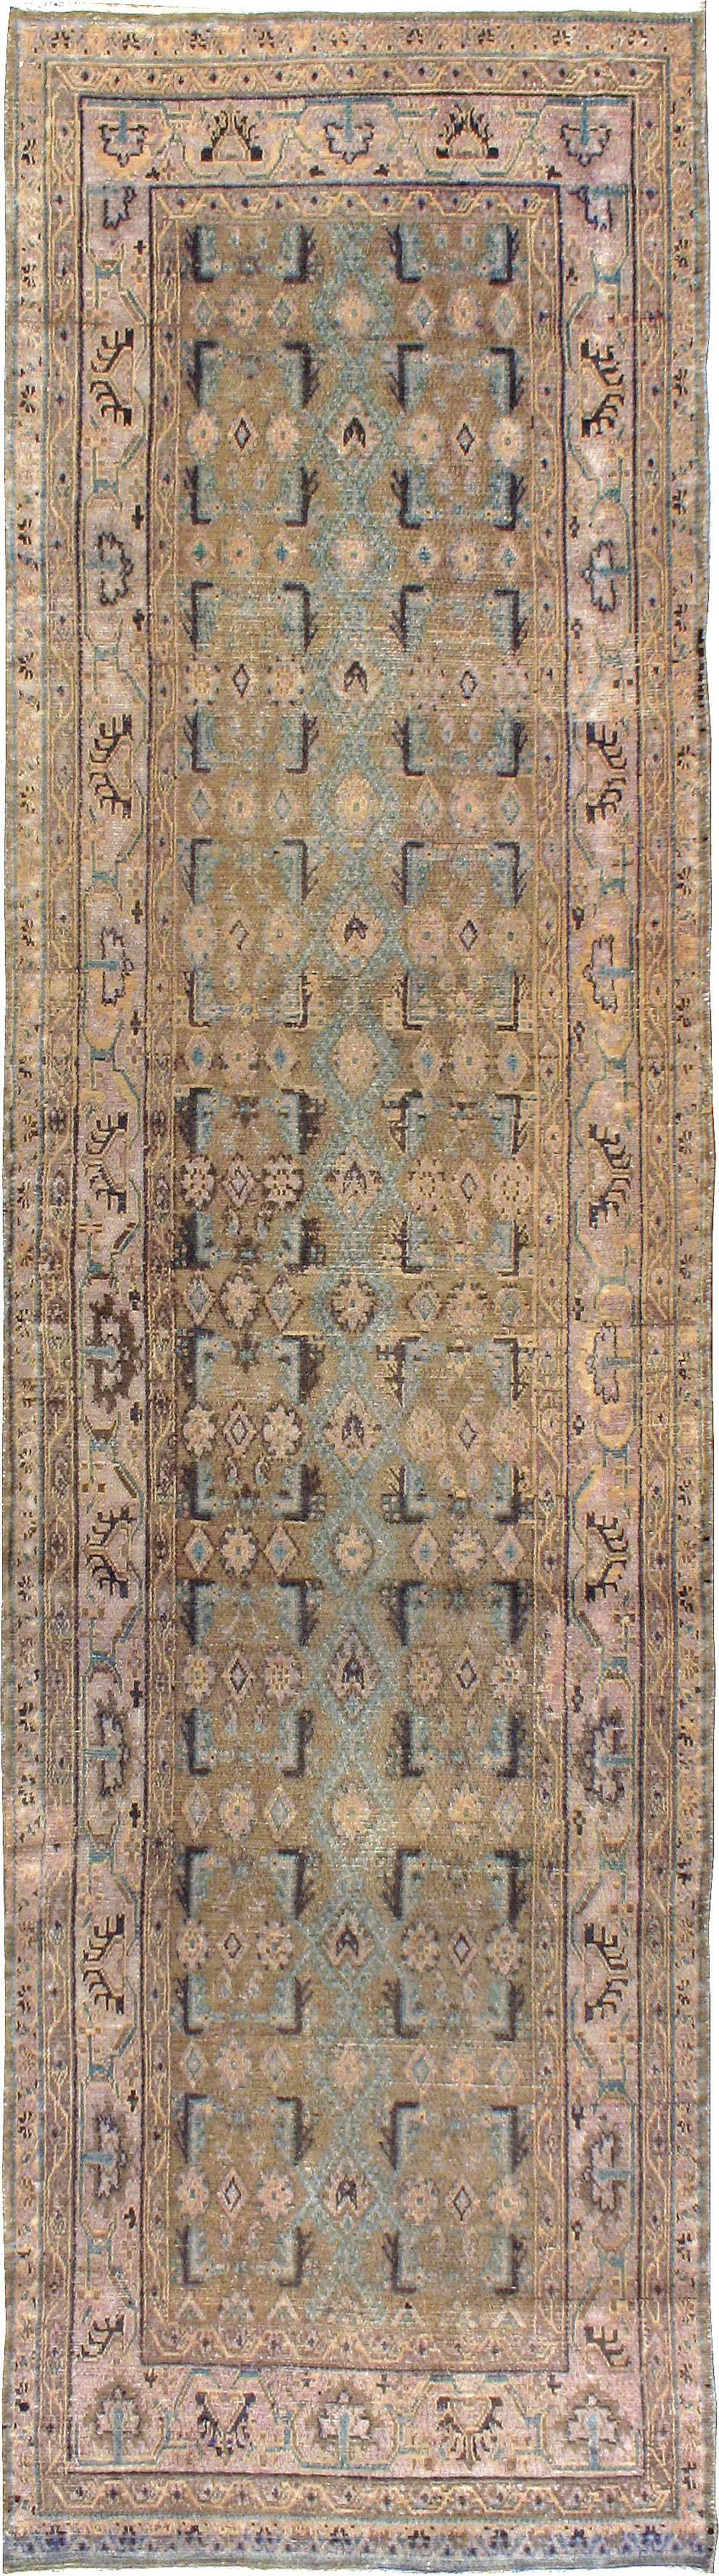 An antique Persian Malayer rug from the second quarter of the 20th century.